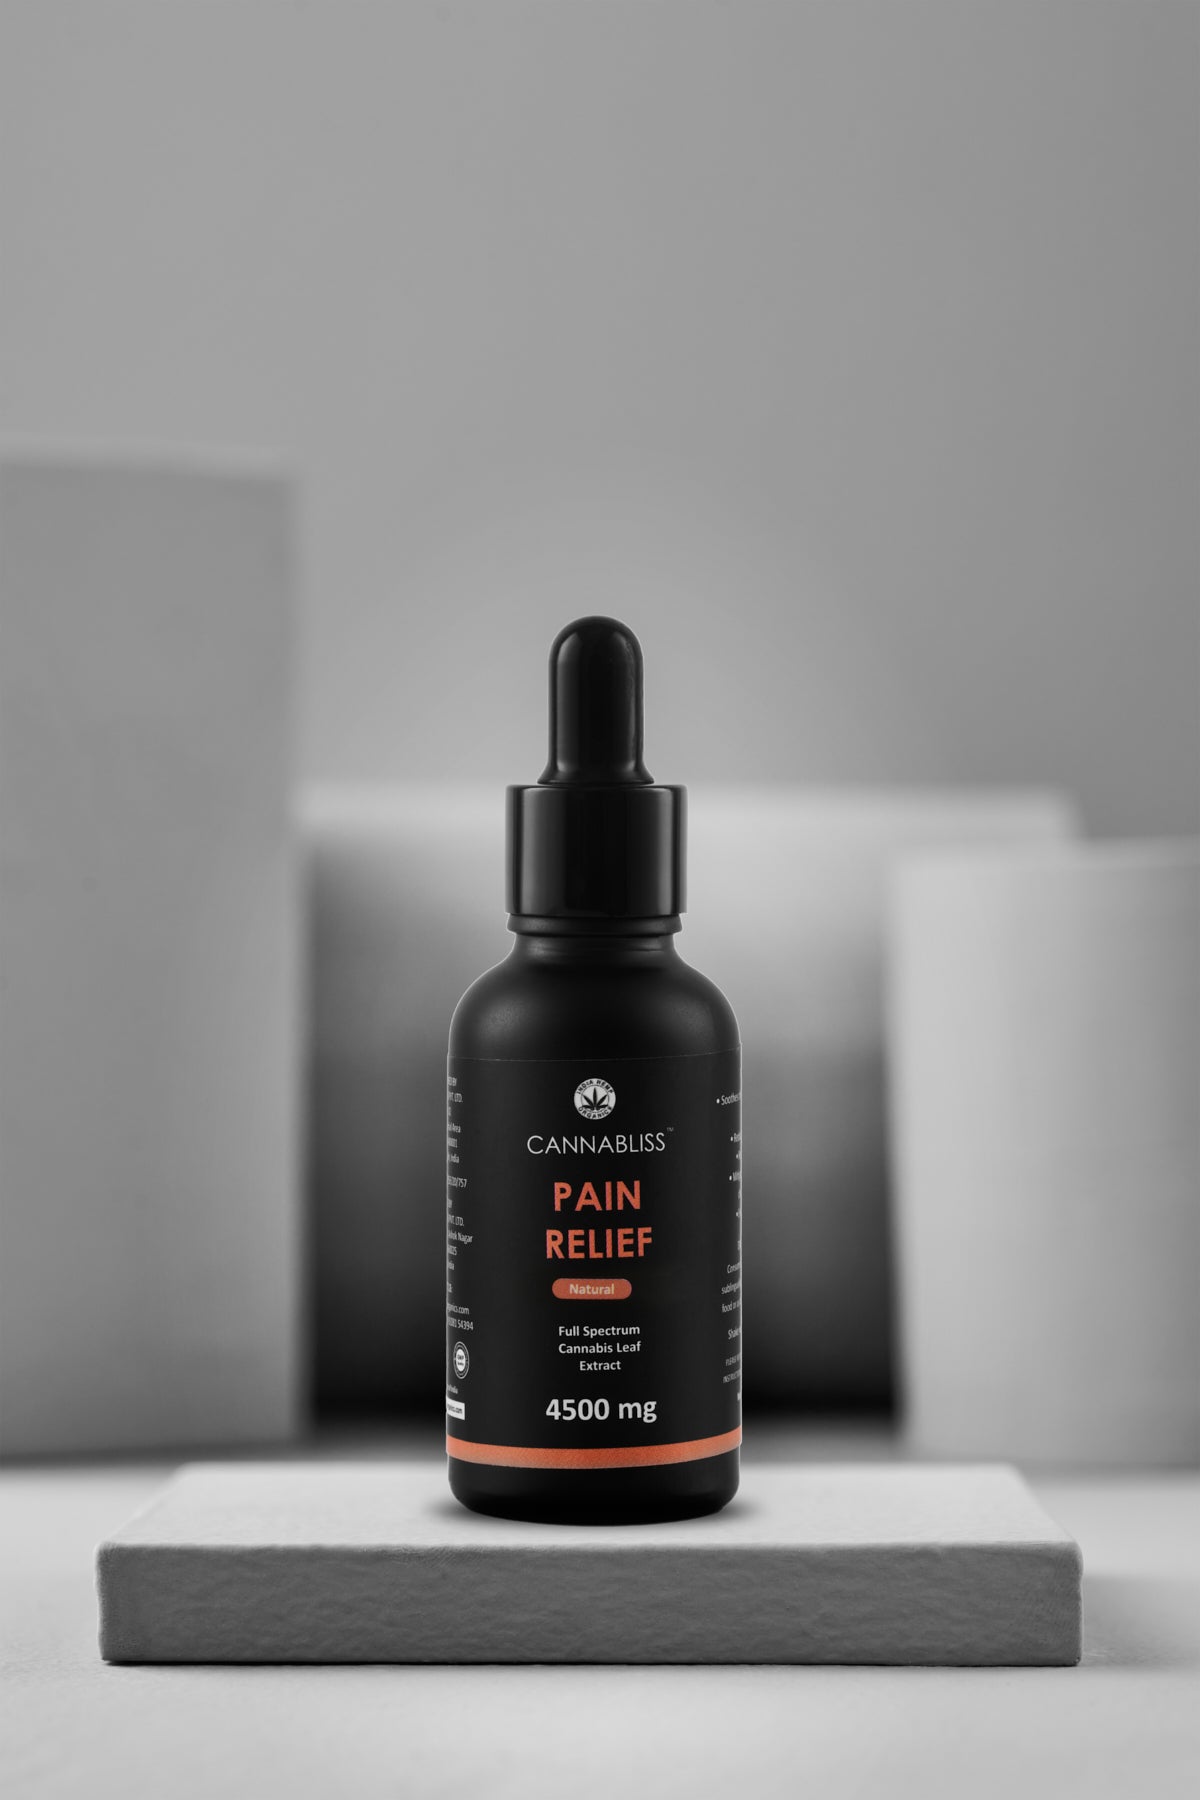 Cannabliss Pain Relief (Natural) 4500mg - 30ml